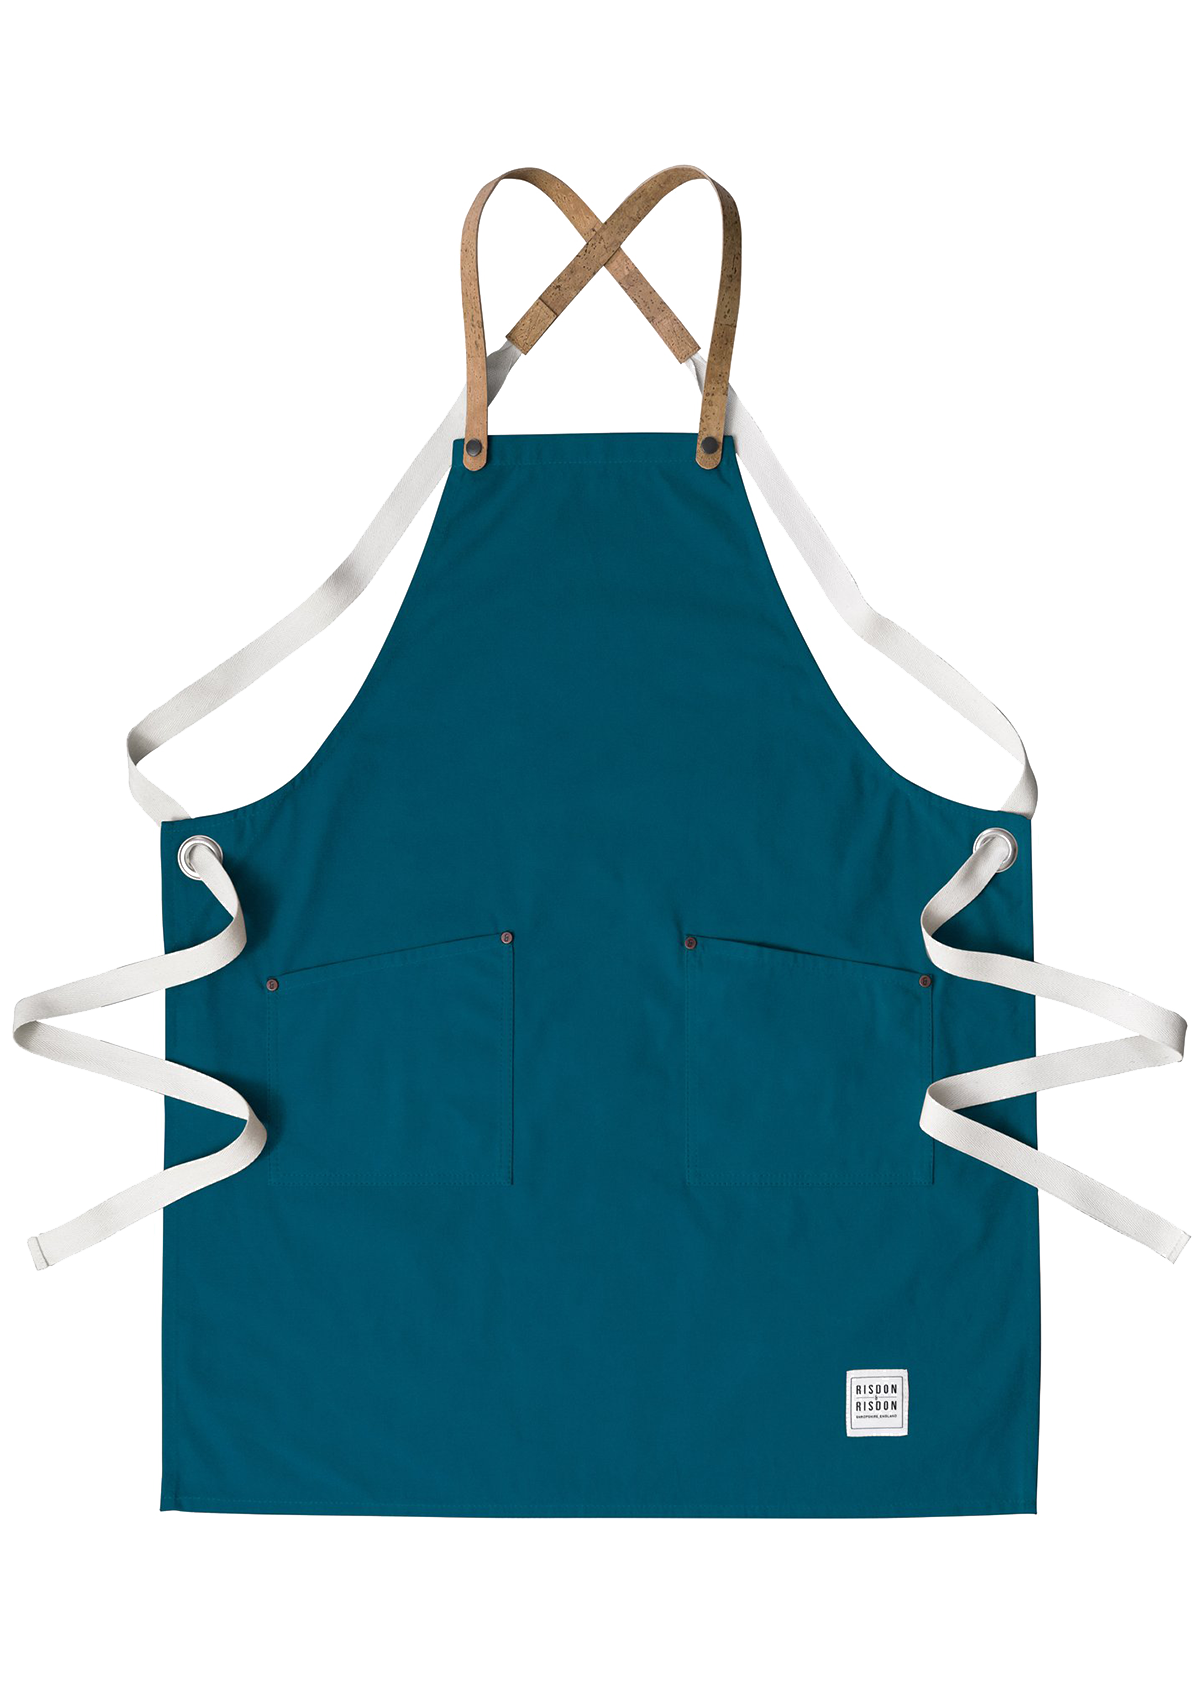 Handcrafted Apron Studio with Cork Straps Unisex